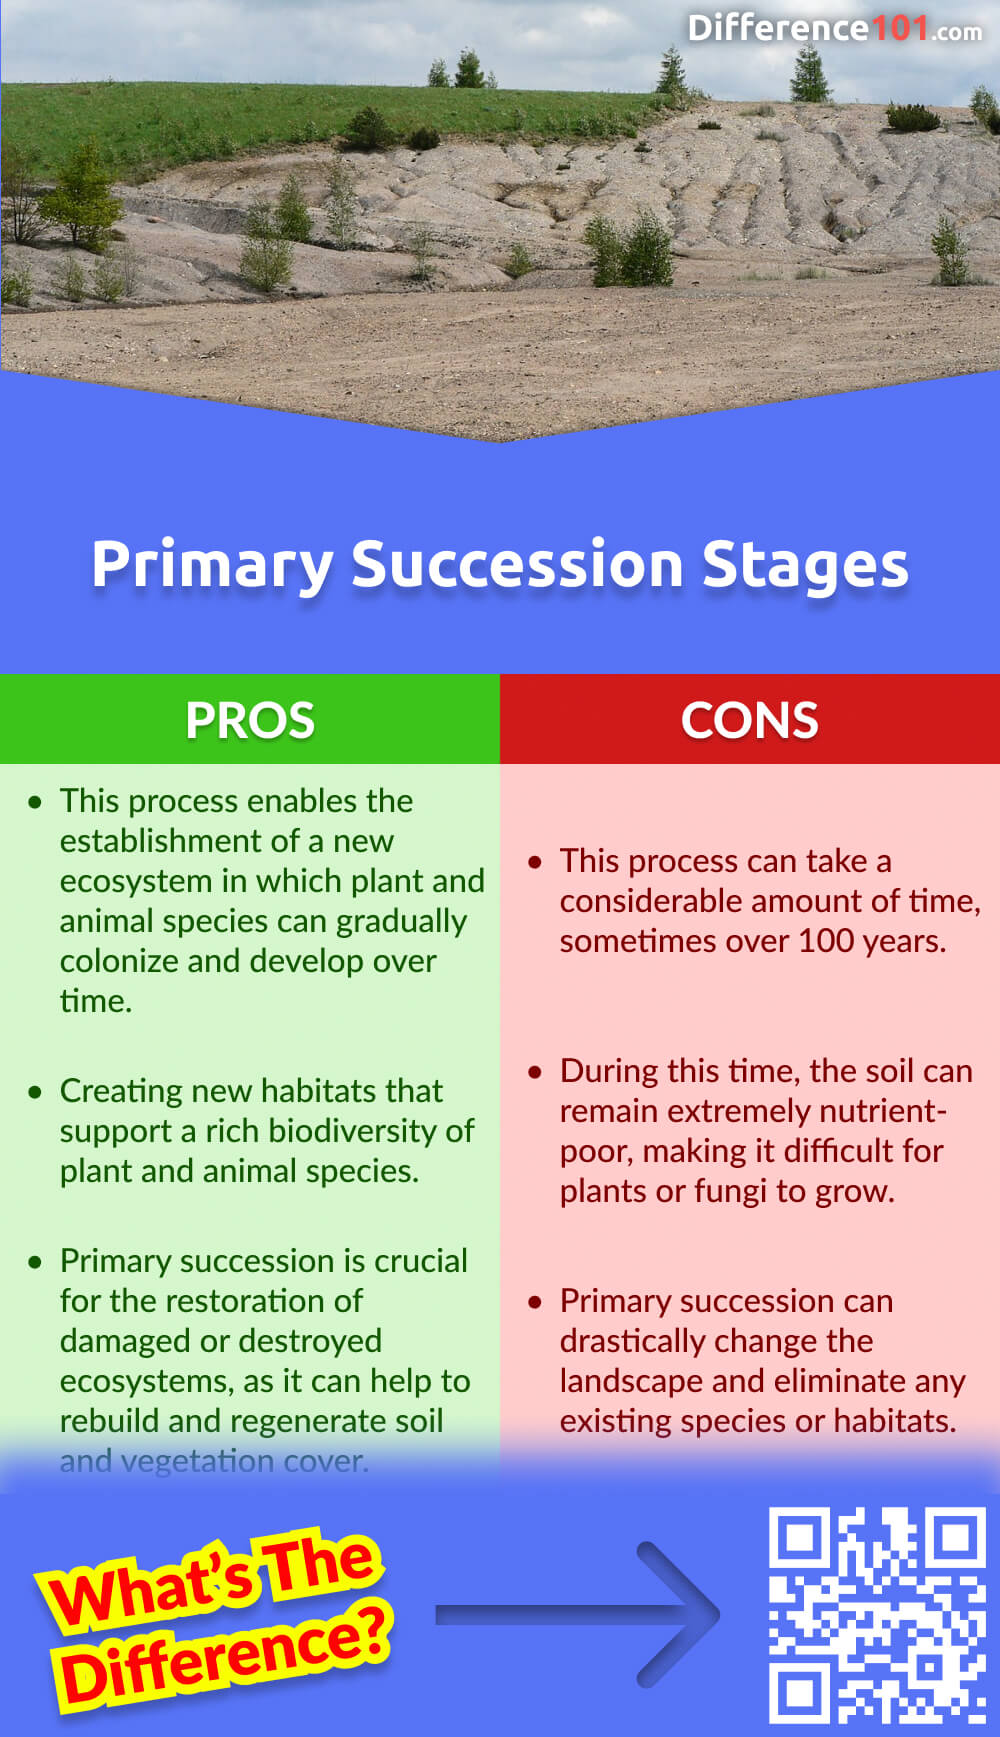 Primary Succession Stages Pros & Cons